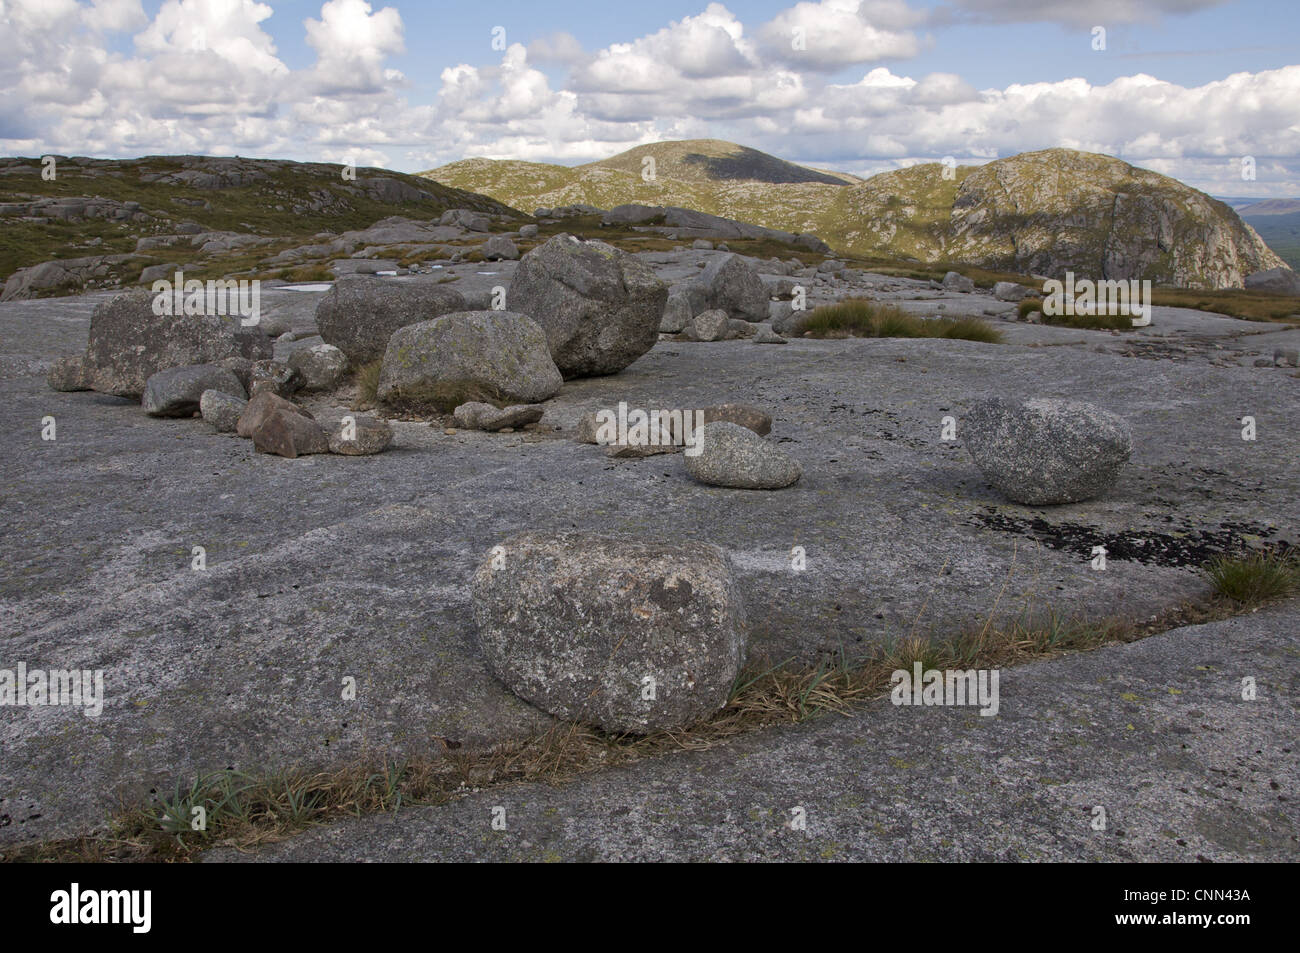 Granite boulders on granite slabs, The De'il's Bowling Green, Craignaw, Galloway Hills, Dumfries and Galloway, Scotland, august Stock Photo